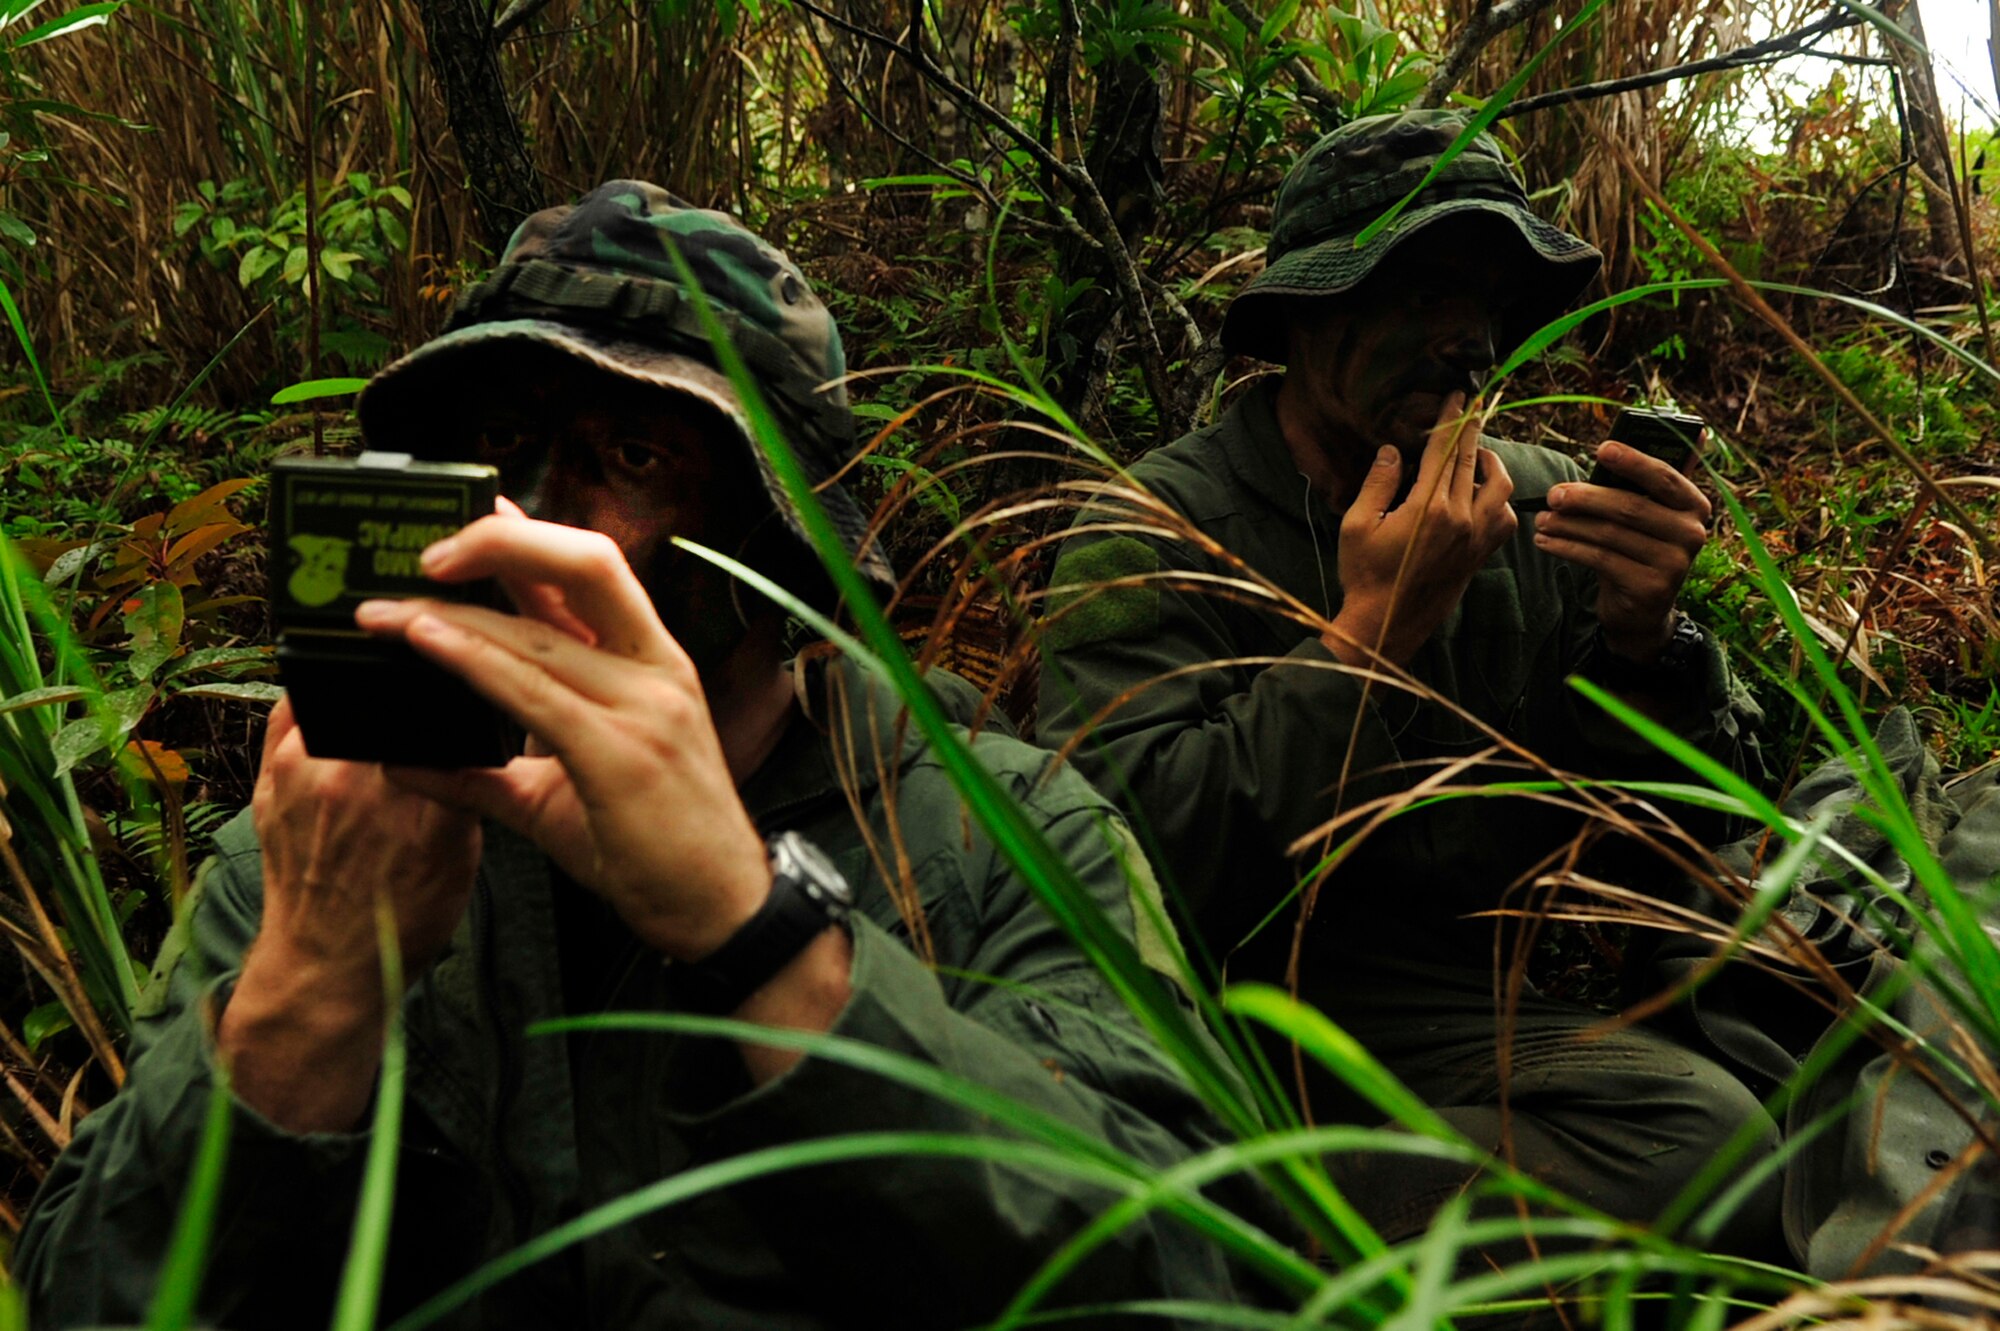 Capt. Aaron Wallace (left) and 1st Lt. Joseph Bisson (right), both pilots from the 909th Air Refueling Squadron, apply camouflage during an evasion scenario after a simulated KC-135 crash at Kadena Air Base, Japan, March 25. Members of the 909th ARS spent the afternoon training proper survival and evasion procedures. The training was part of Beverly High 10-02, a Local Operational Readiness Exercise designed to evaluate the readiness of Kadena Airmen. (U.S. Air Force photo/Senior Airman Amanda N. Grabiec)